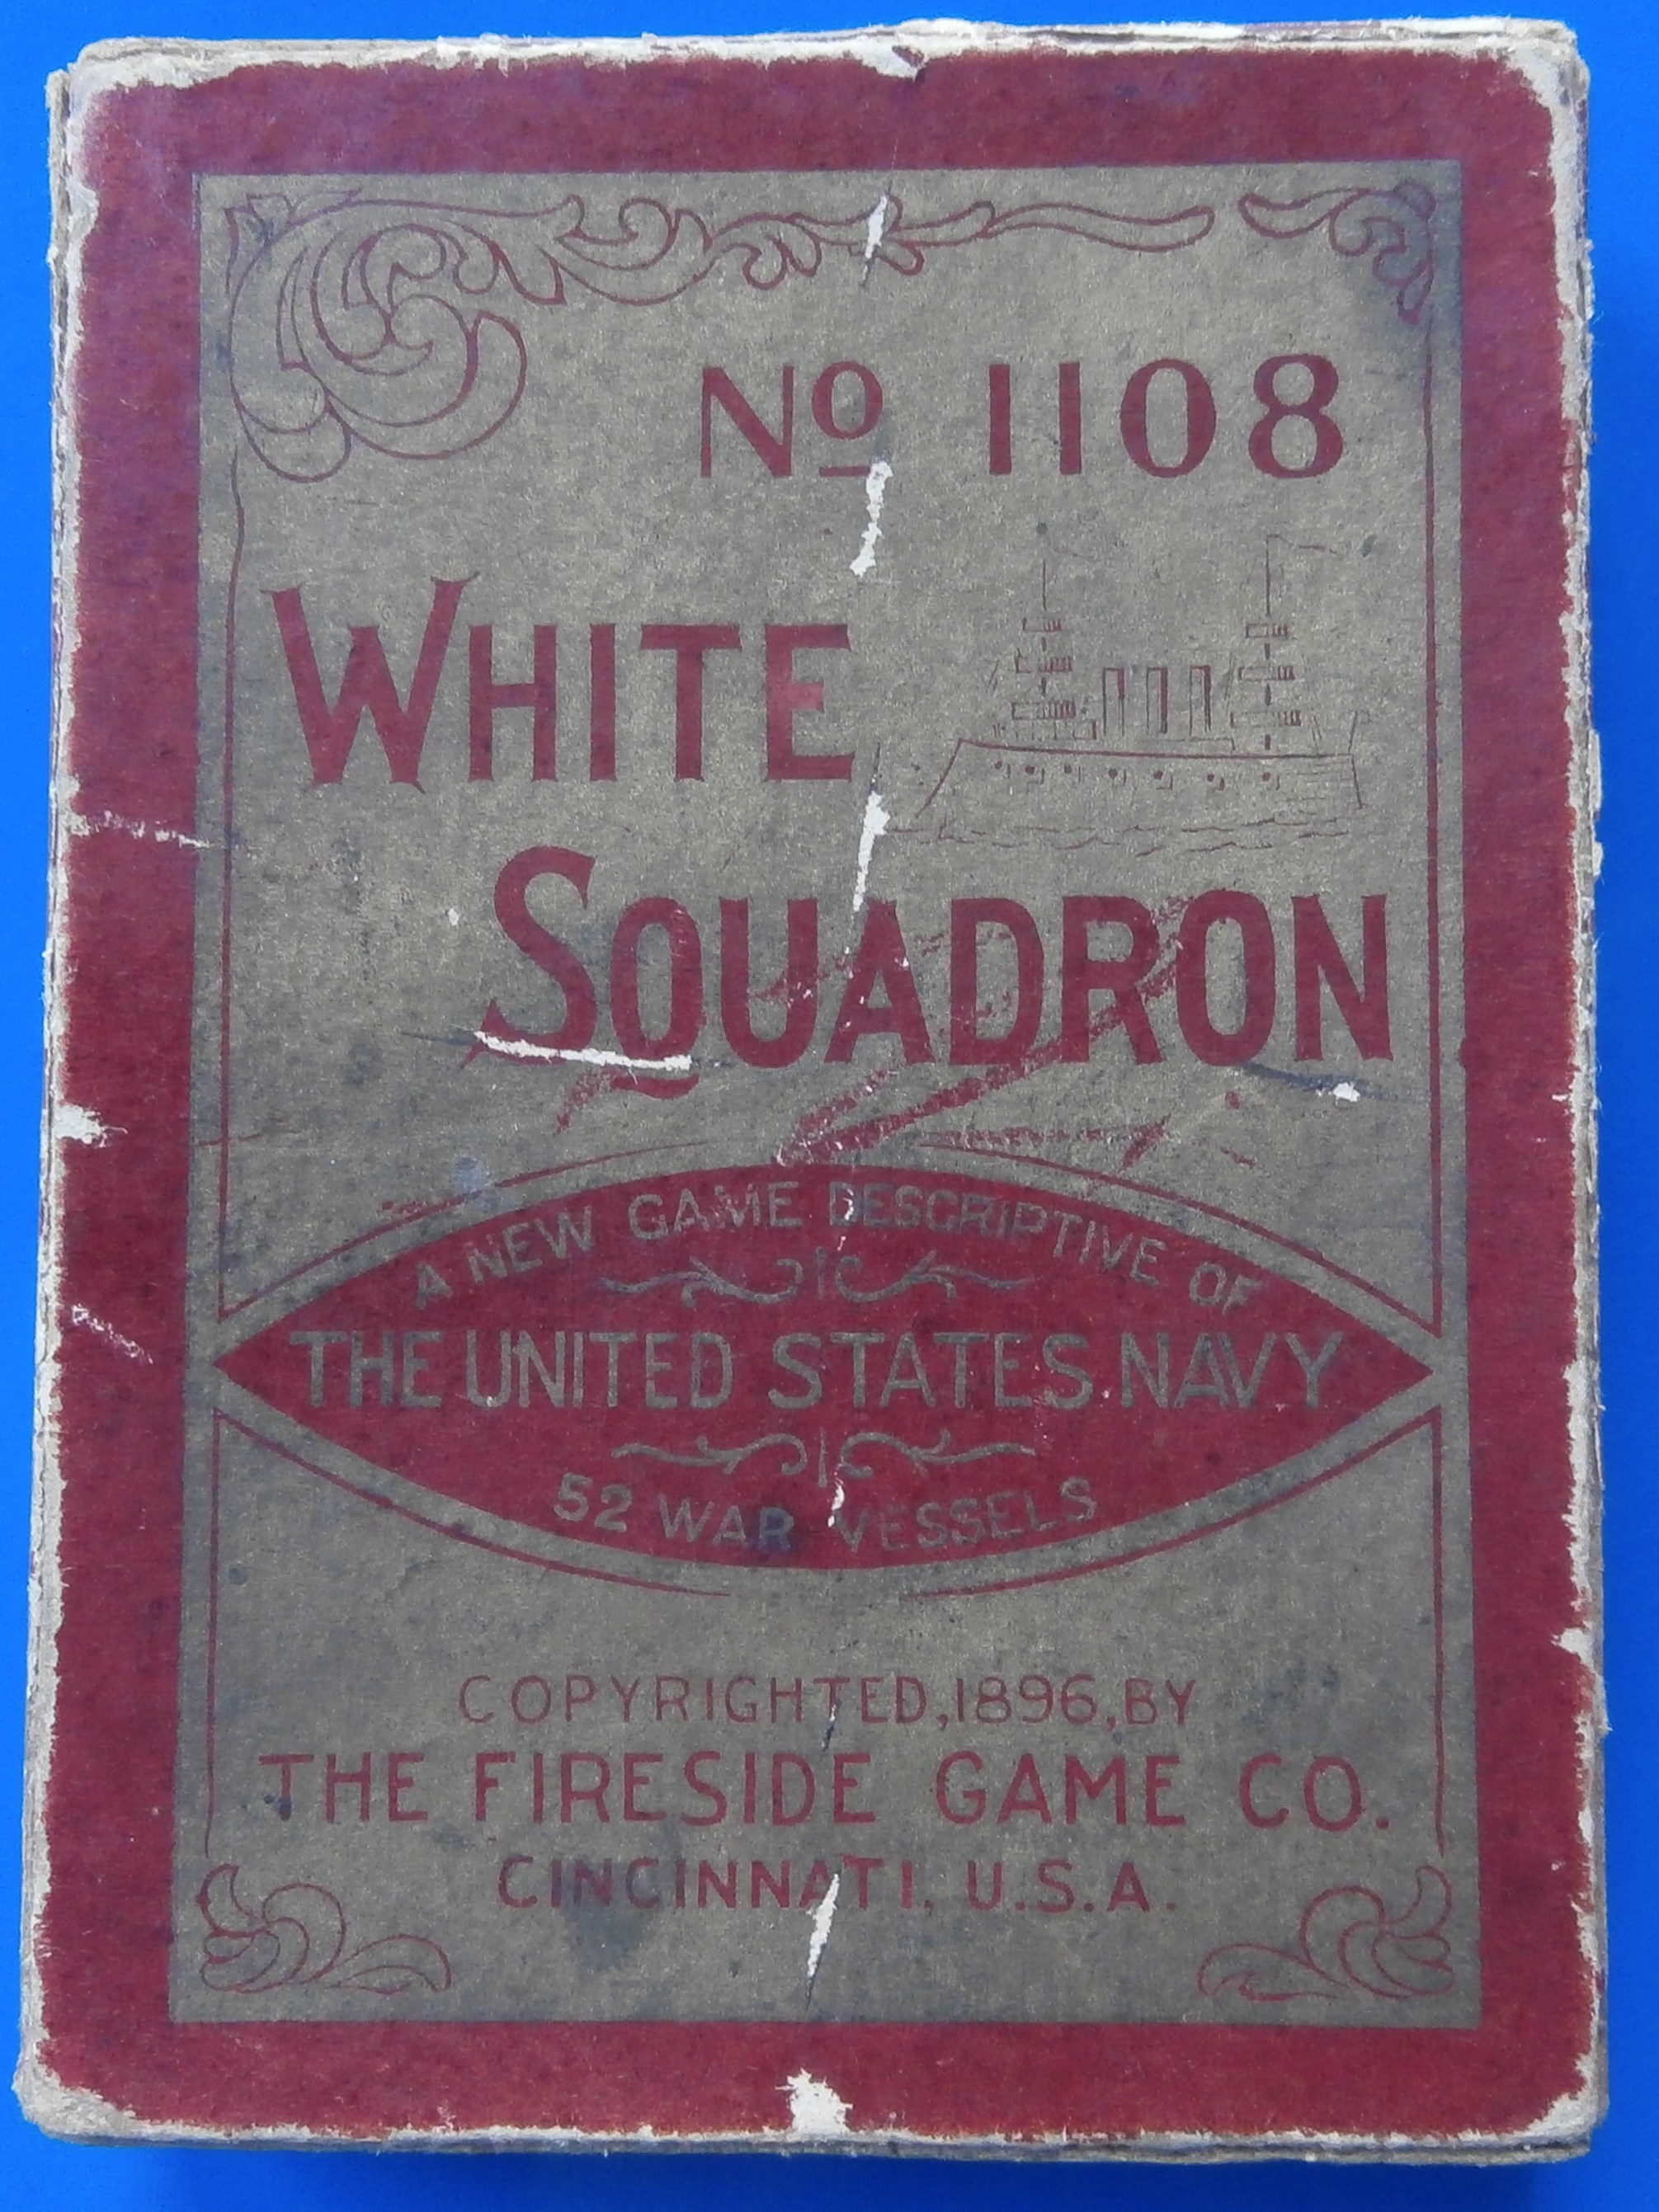 The Old 1896 Card Game: White Squadron by Fireside Game Company